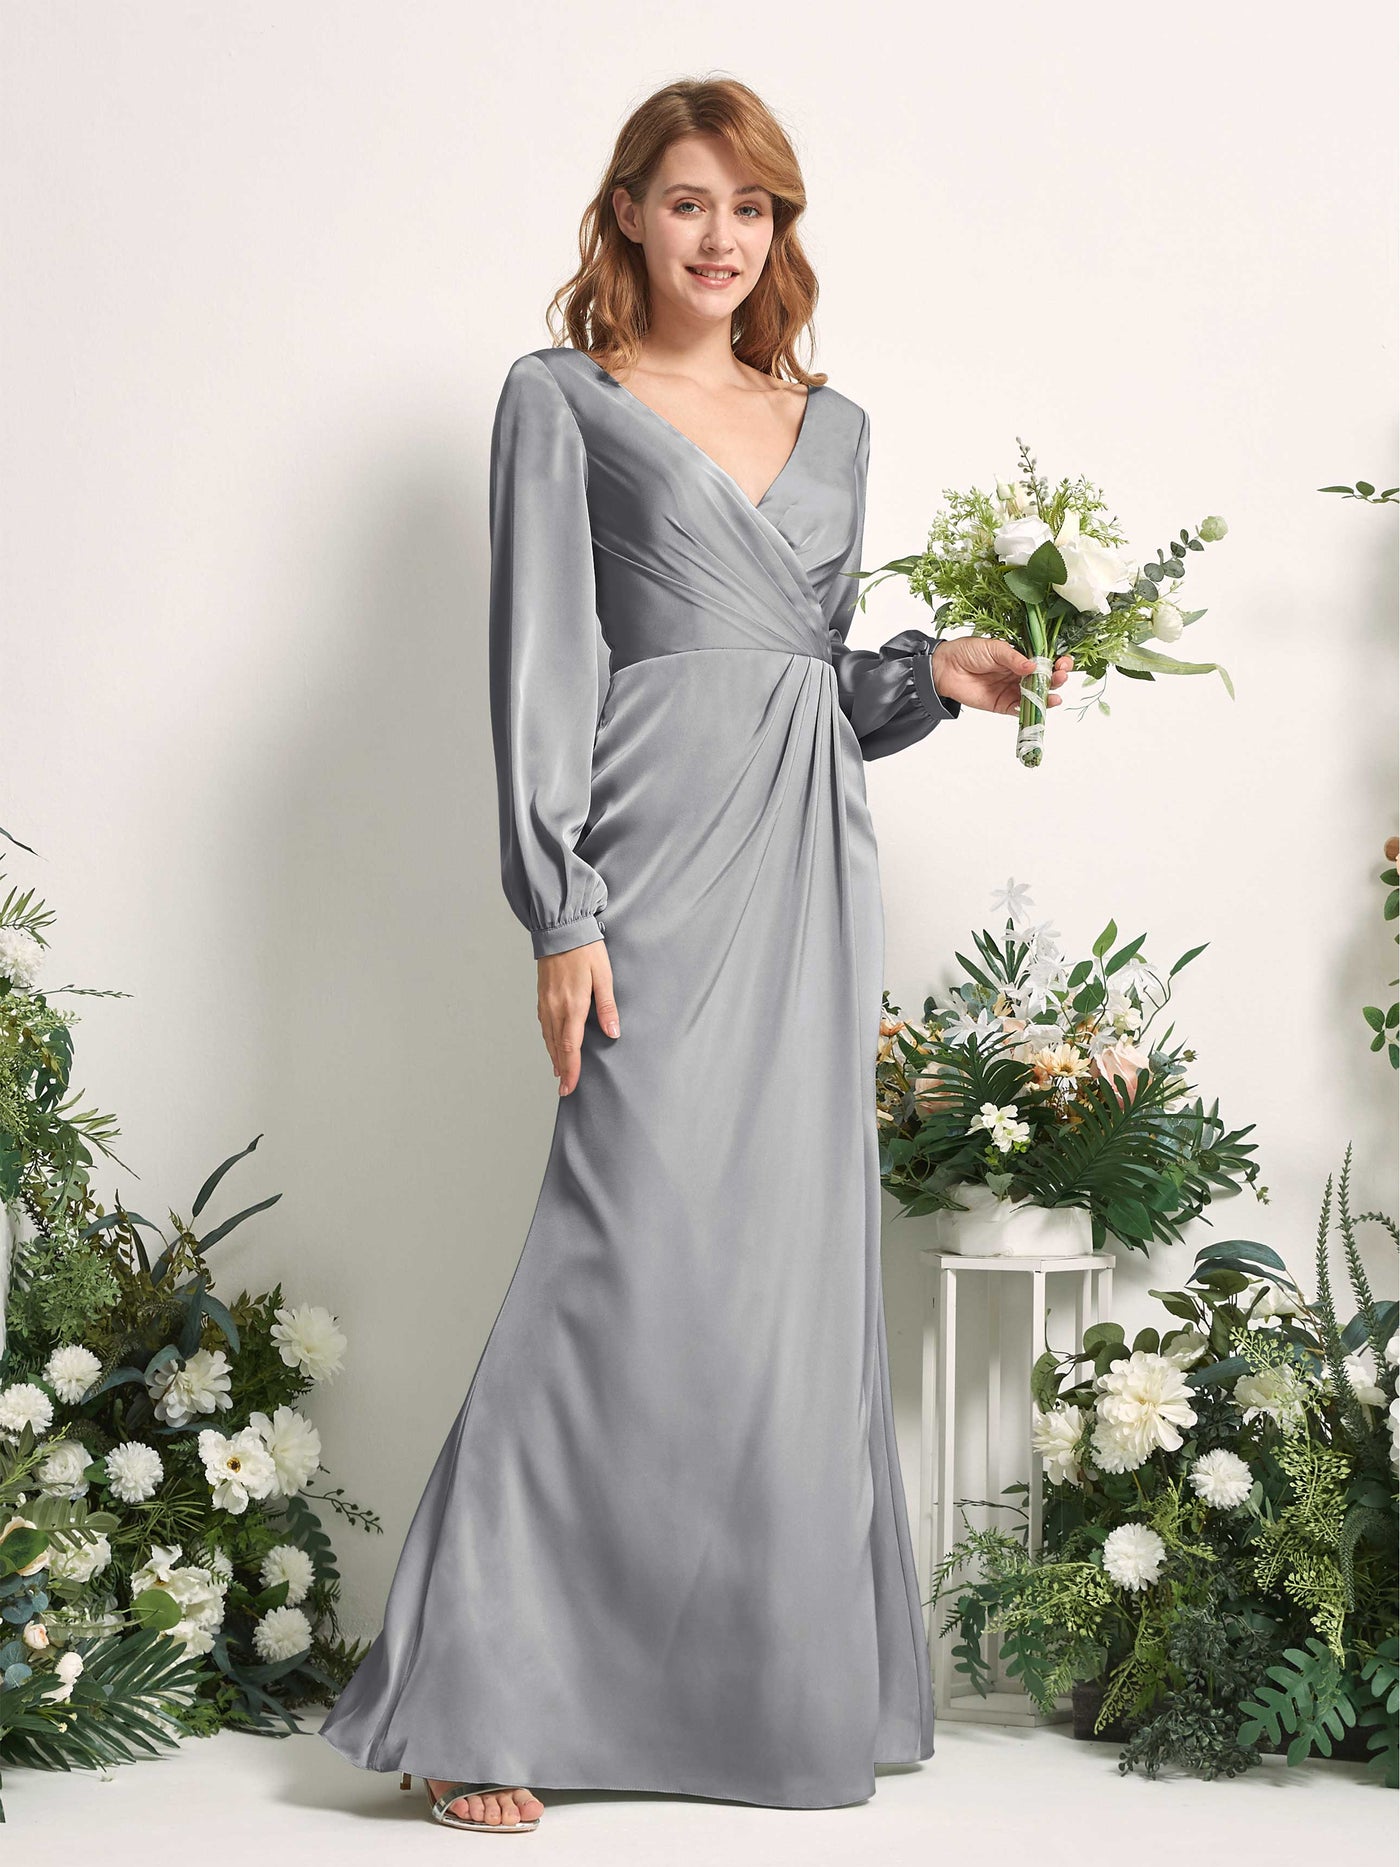 Steel Gray Bridesmaid Dresses Bridesmaid Dress Ball Gown Satin V-neck Full Length Long Sleeves Wedding Party Dress (80225107)#color_steel-gray